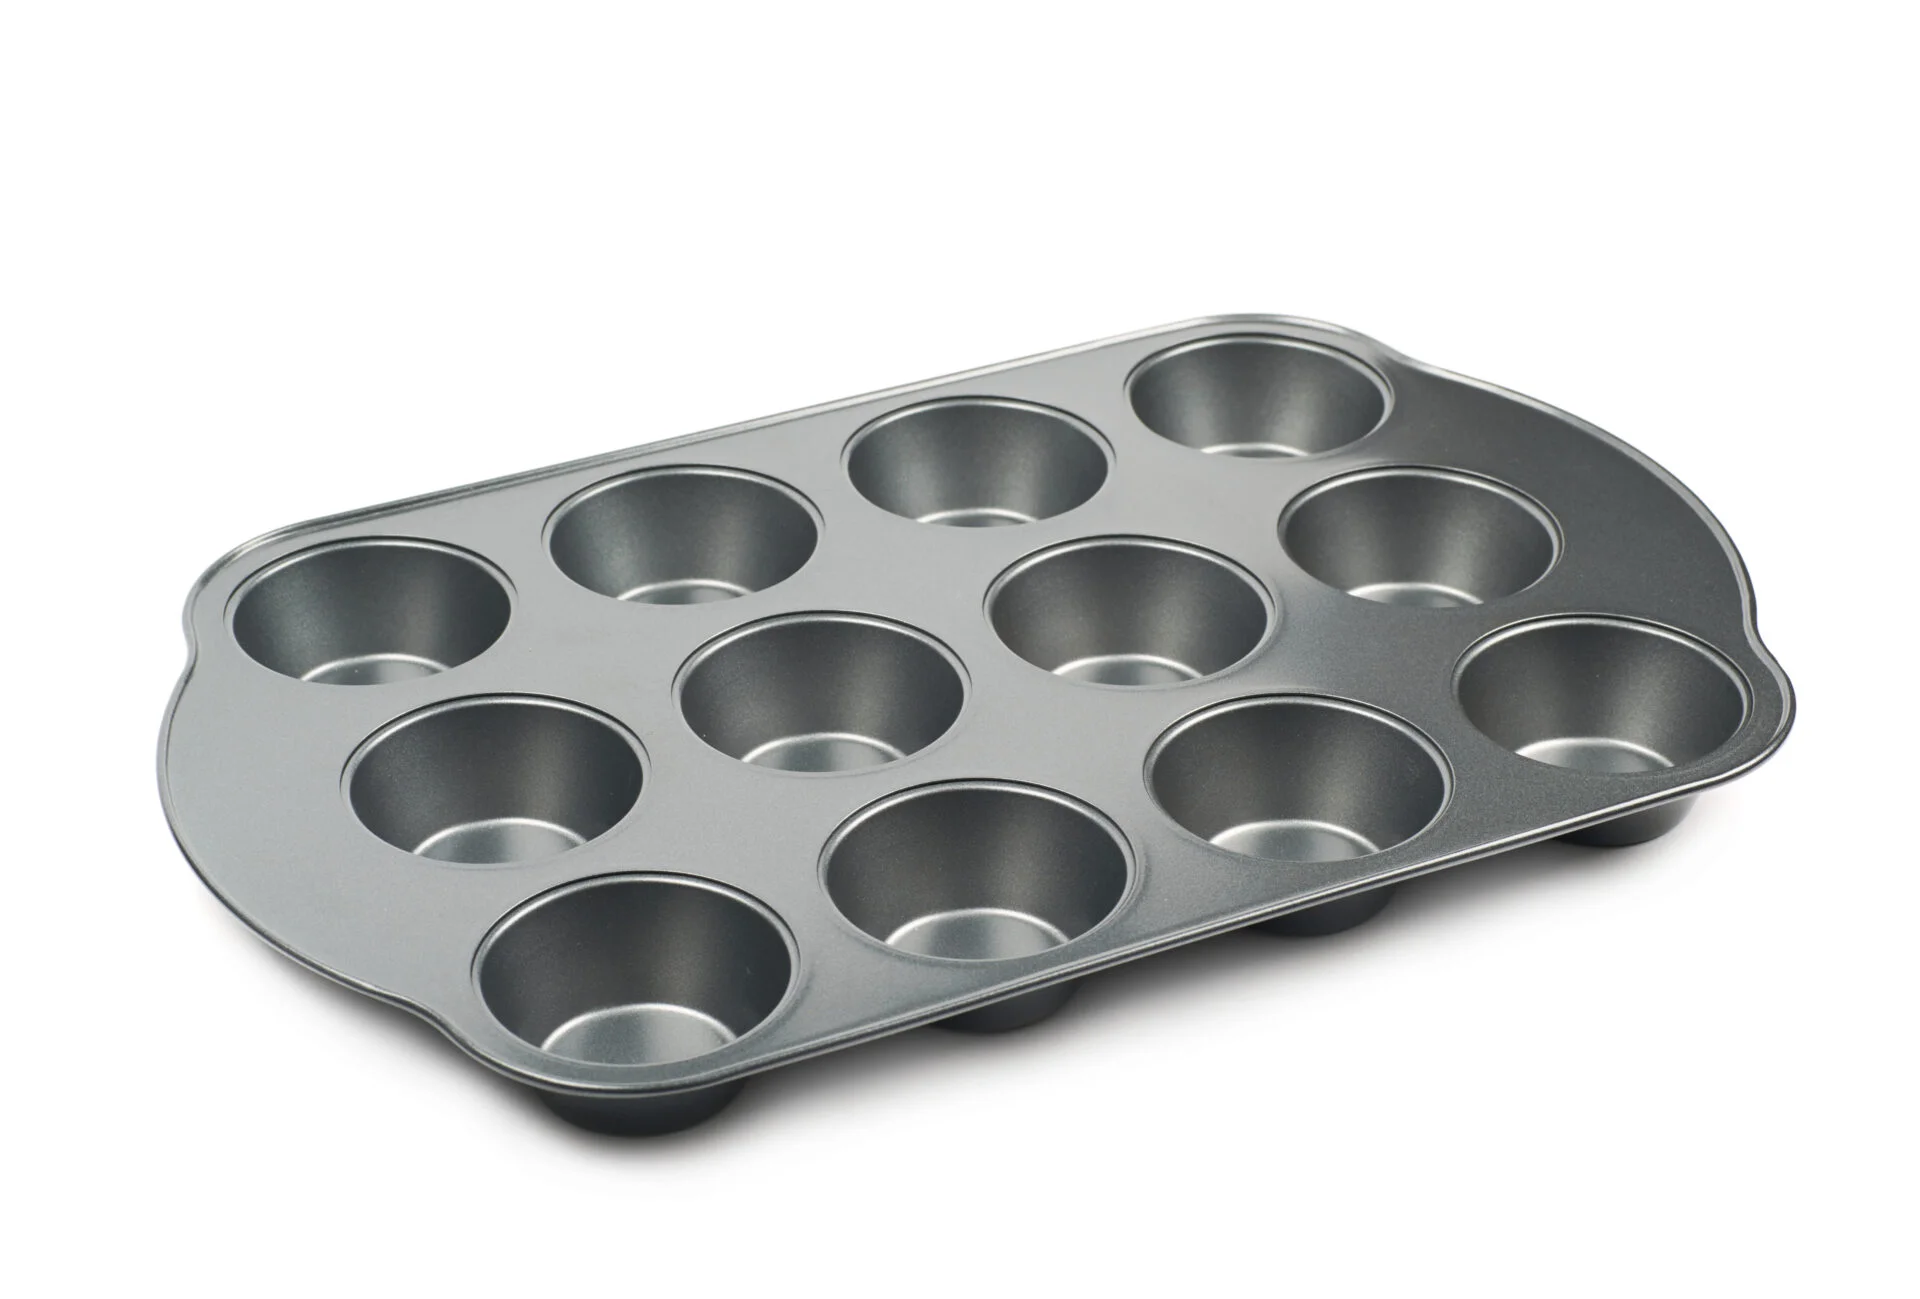 Metal muffin cupcake tray pan isolated over the white background